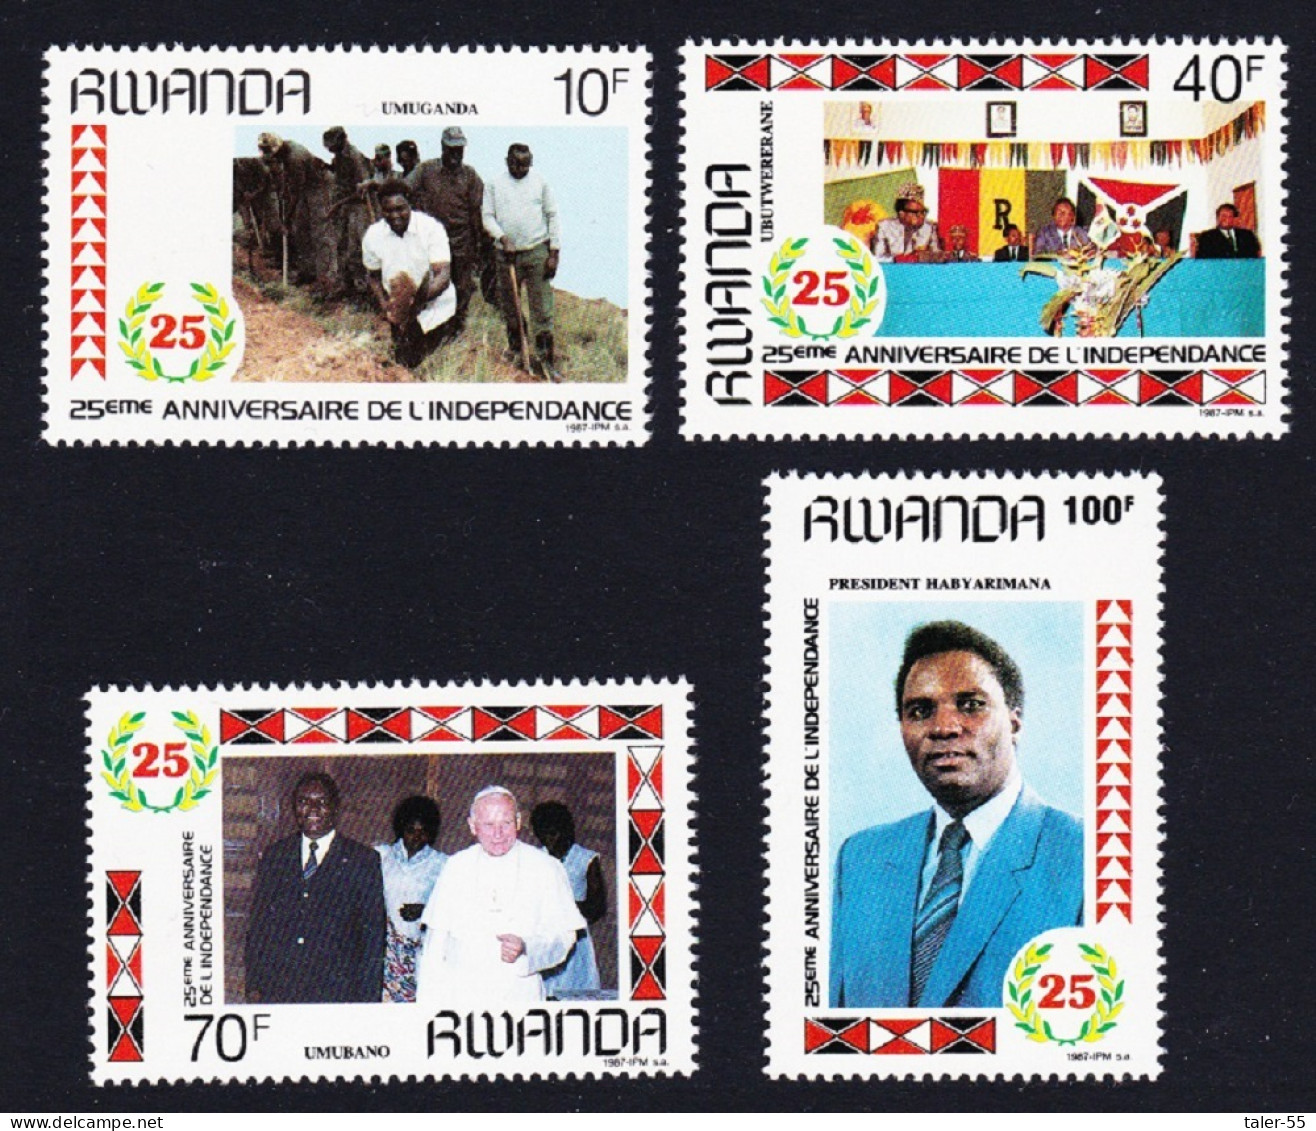 Rwanda 25th Anniversary Of Independence 4v 1987 MNH SG#1293-1296 Sc#1283-1286 - Unused Stamps